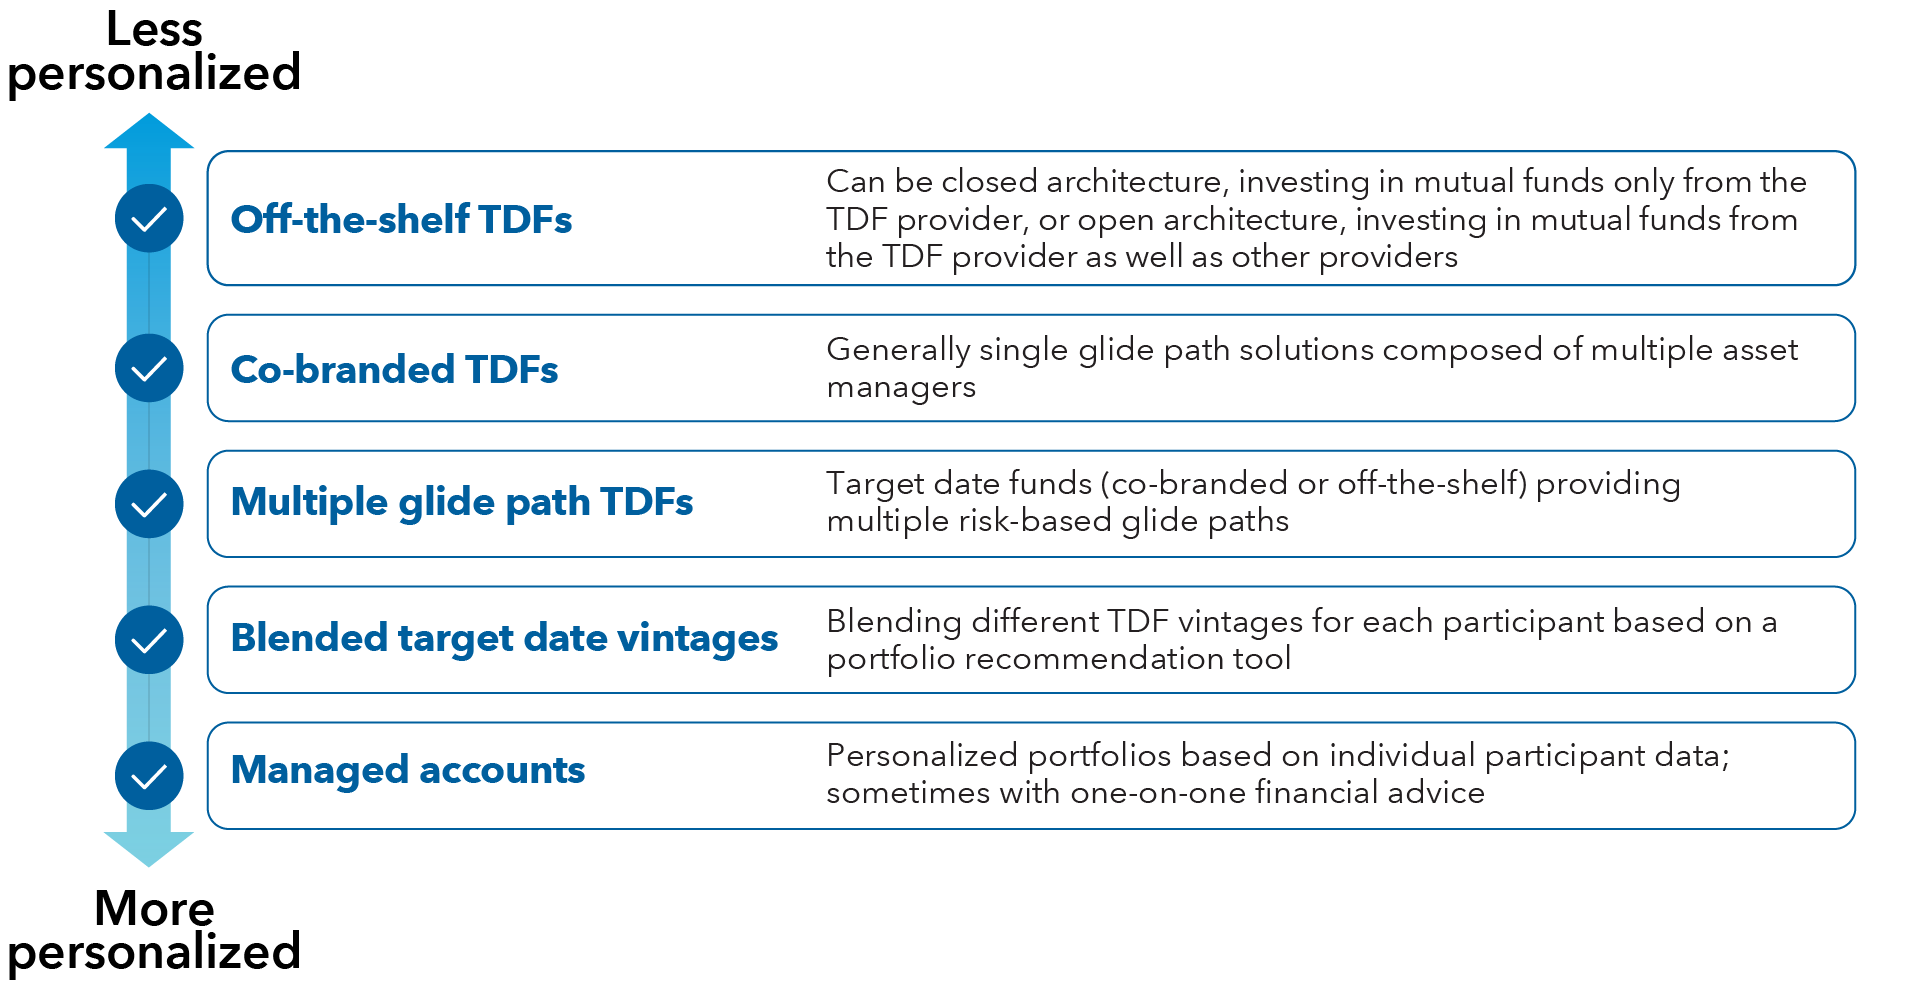 This graphic shows QDIA options ranging from less personalized to more personalized. On the far end of the less personalized spectrum are off-the-shelf TDFs, which can be closed architecture, investing in mutual funds only from the TDF provider, or open architecture, investing in mutual funds from the TDF provider as well as other providers. Next are co-branded TDFs, which generally are single glide path solutions composed of multiple asset managers. Next, in the middle of the spectrum, are multiple glide path TDFs, which are co-branded or off-the-shelf TDFs that provide multiple risk-based glide paths. Next are blended target date vintages, which blend different TDF vintages for each participant based on a portfolio recommendation tool. Lastly, on the far end of the more personalized side, are managed accounts, which provide personalized portfolios based on individual participant data, sometimes with one-on-one financial advice.